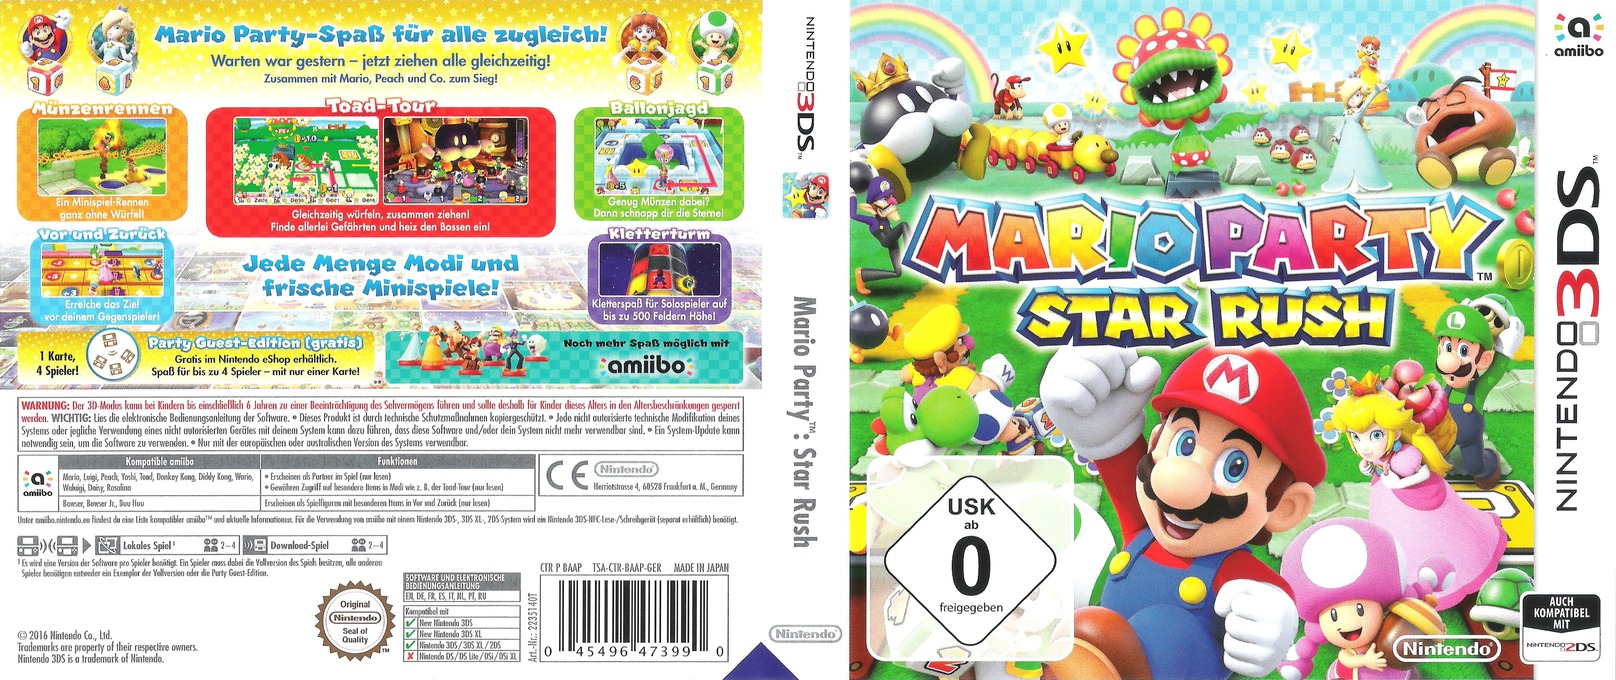 Mario Party Star Rush Download Play